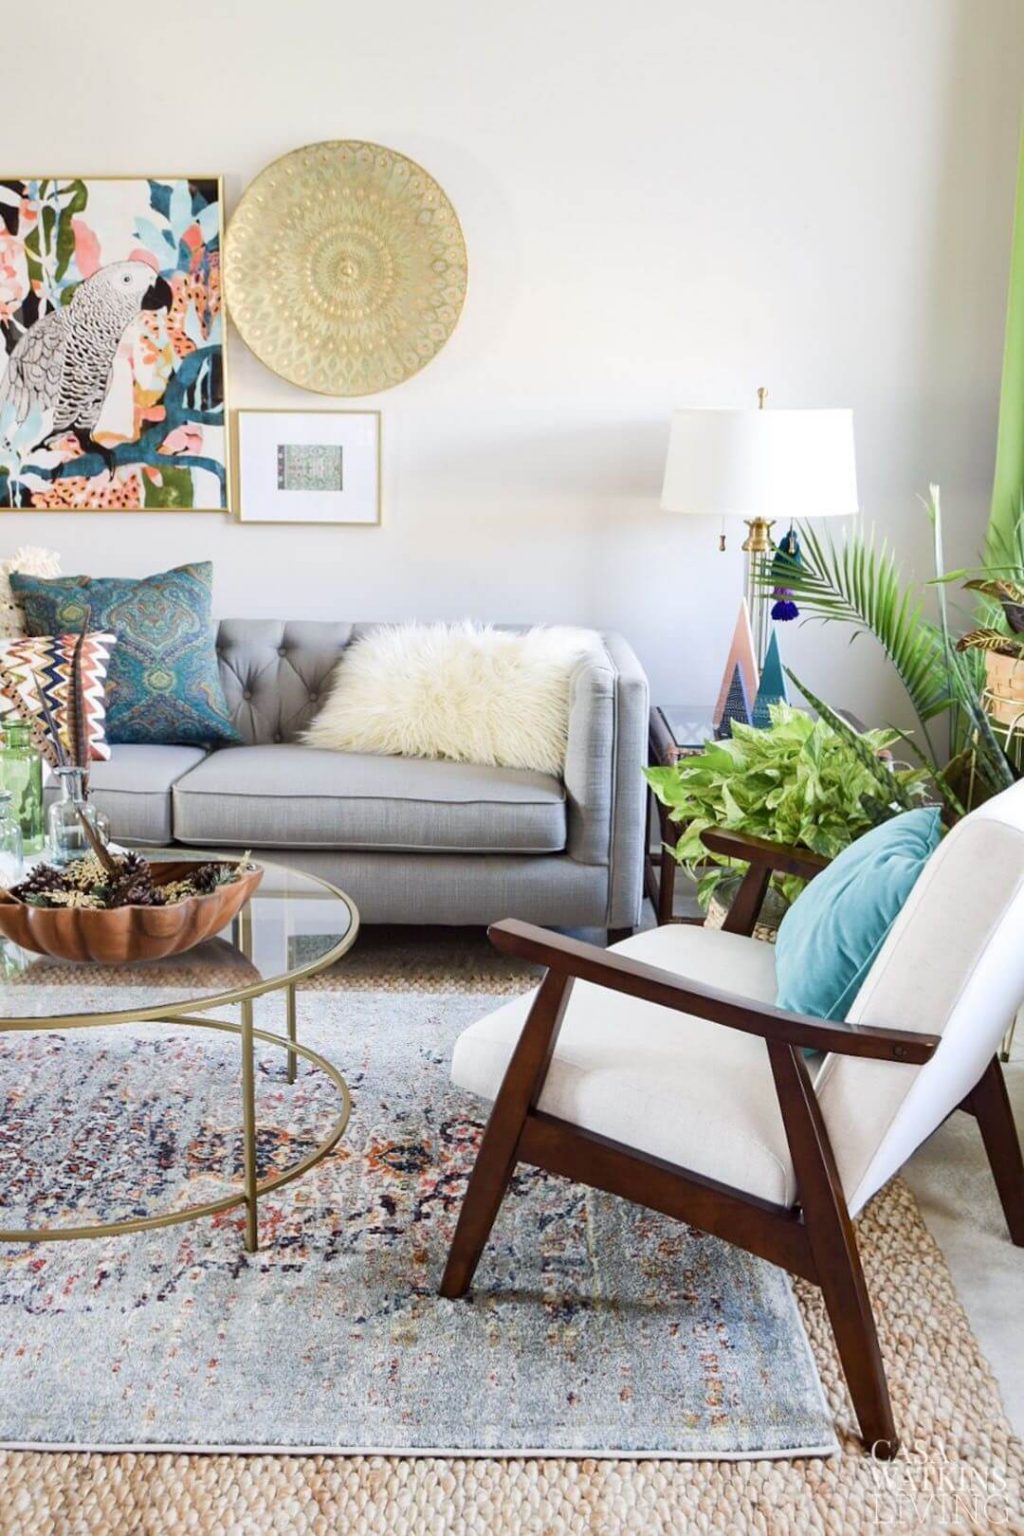 25+ Boho Living Room Ideas to Spruce Up the Place